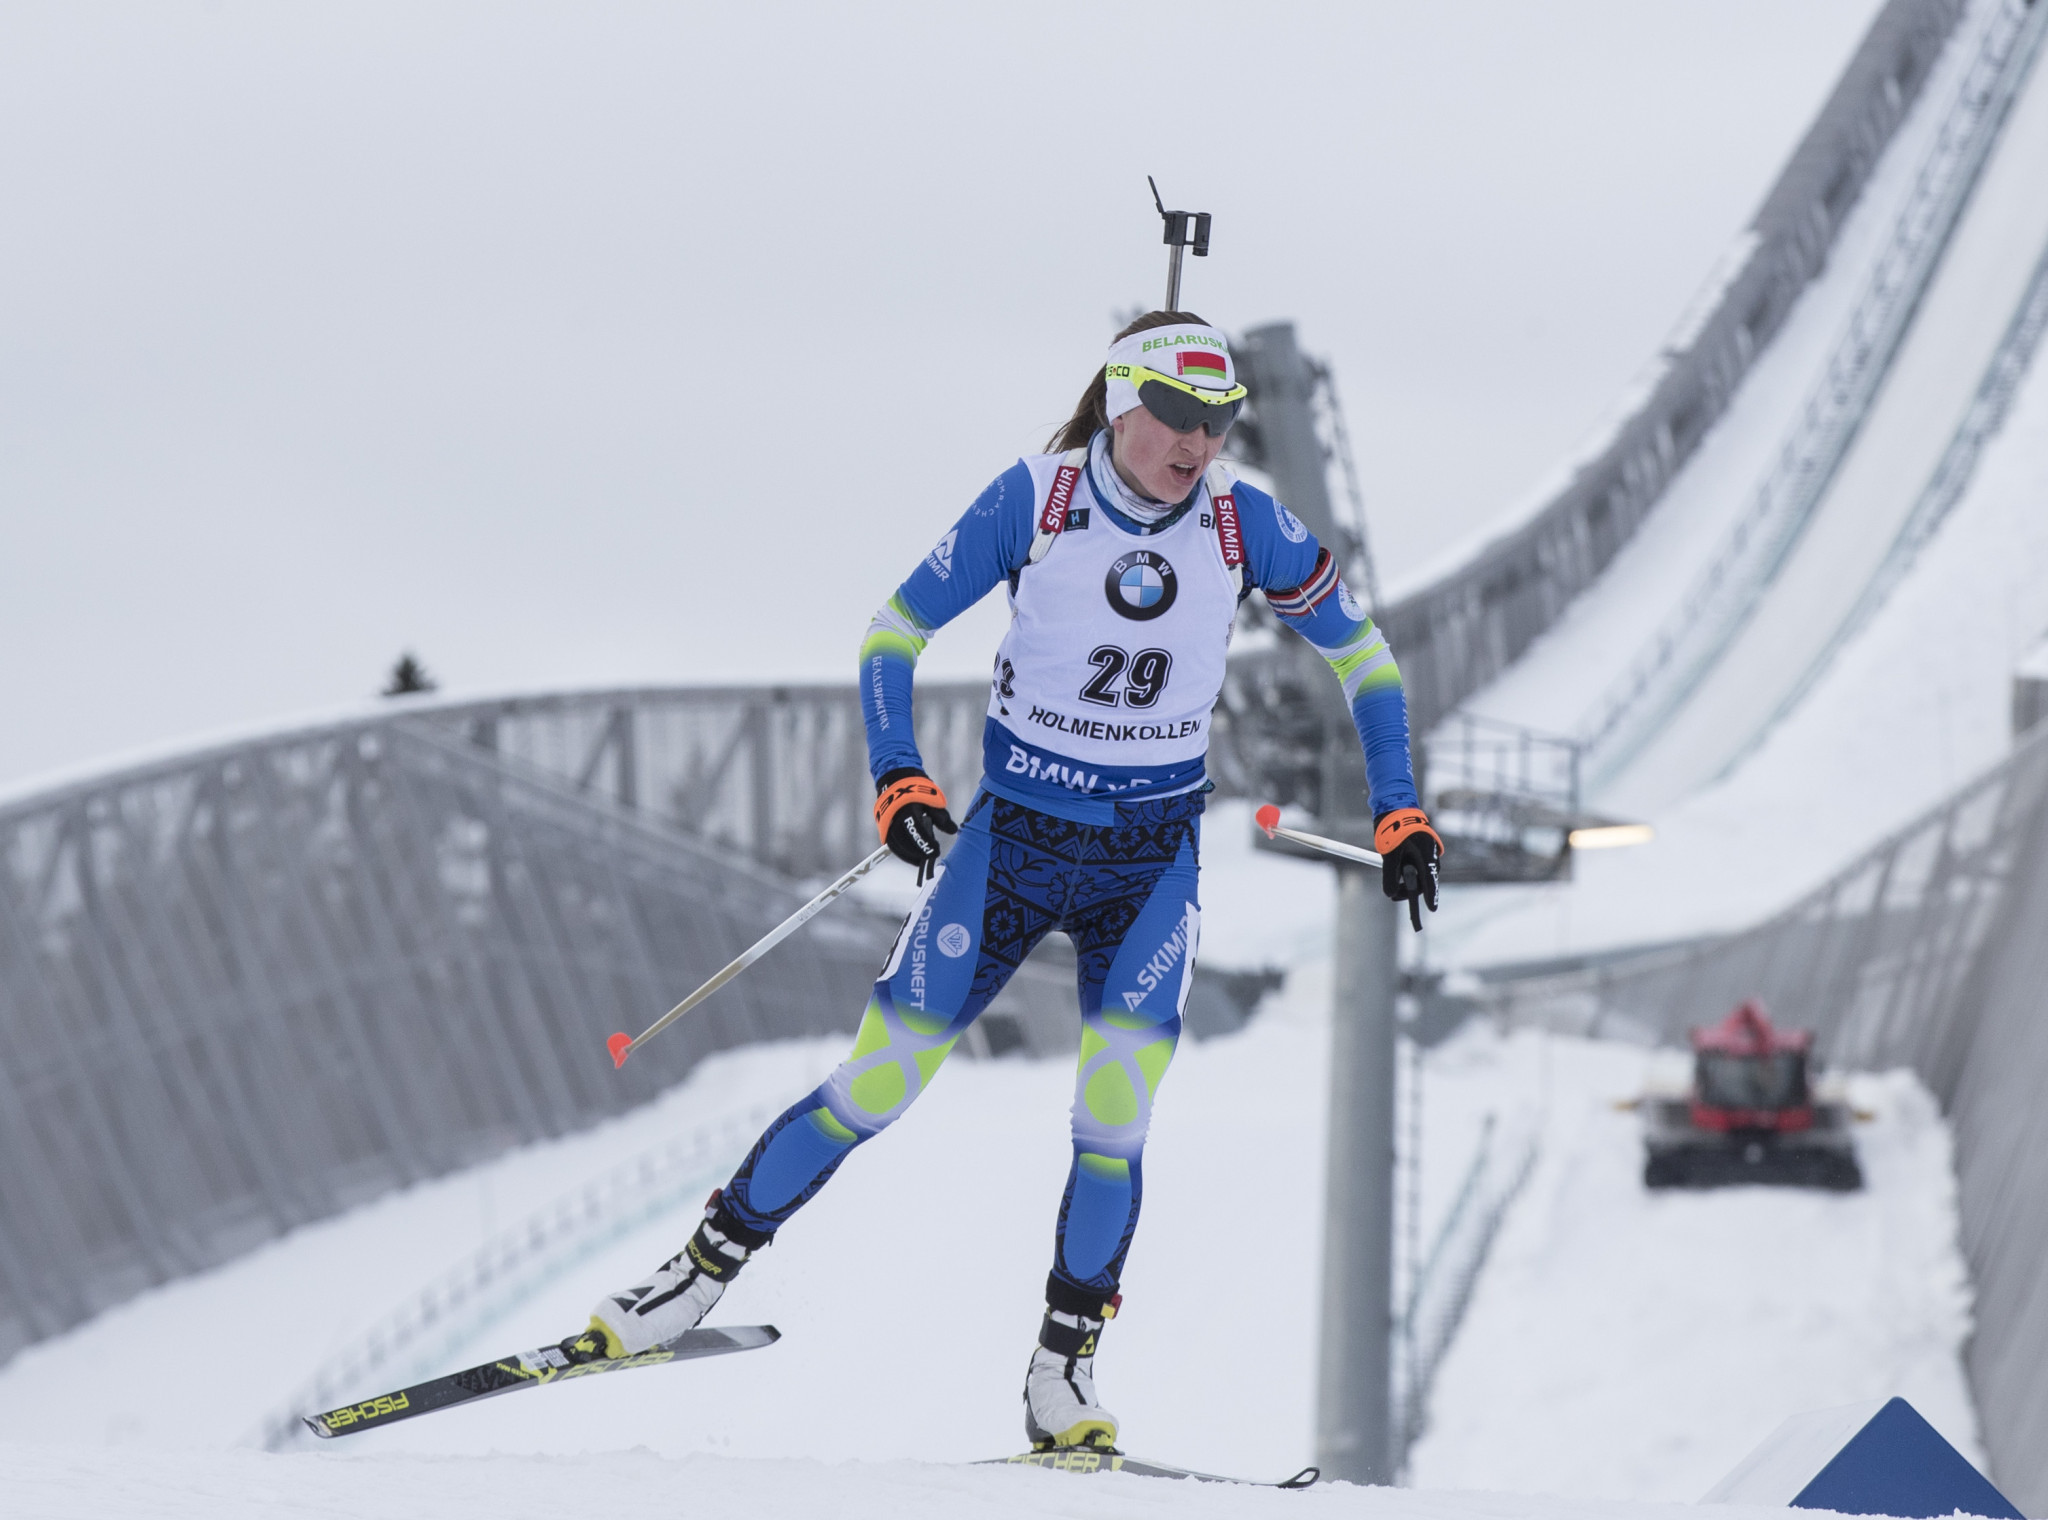 Norwegian Biathlon Association ponders moving camp from France to Italy due to COVID-19